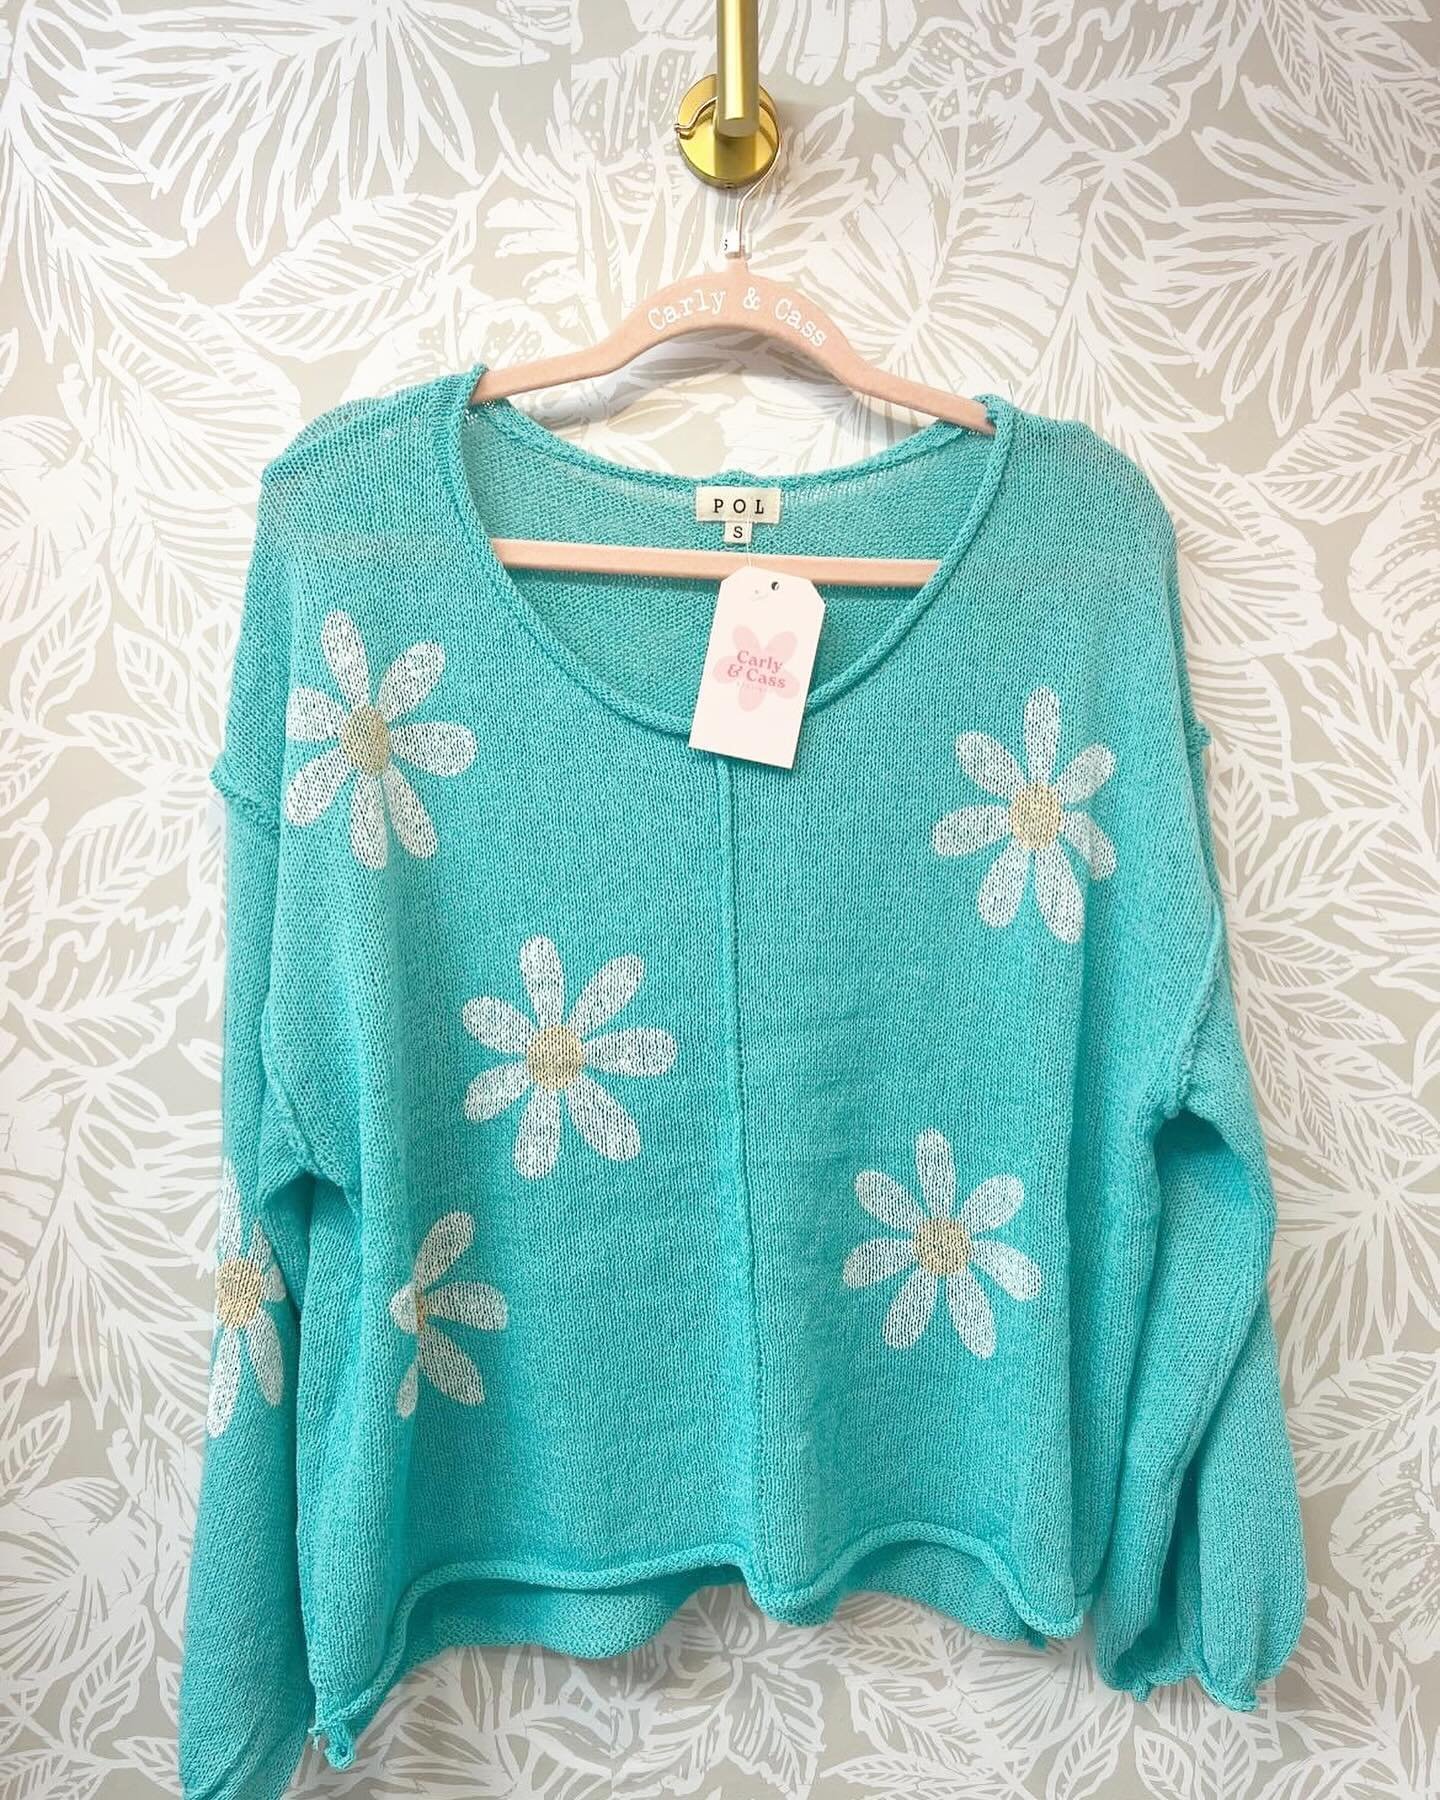 We&rsquo;ve restocked the POL daisy light blue sweater and added a teal one too! Available in our Sylva store in sizes S-L! 💕